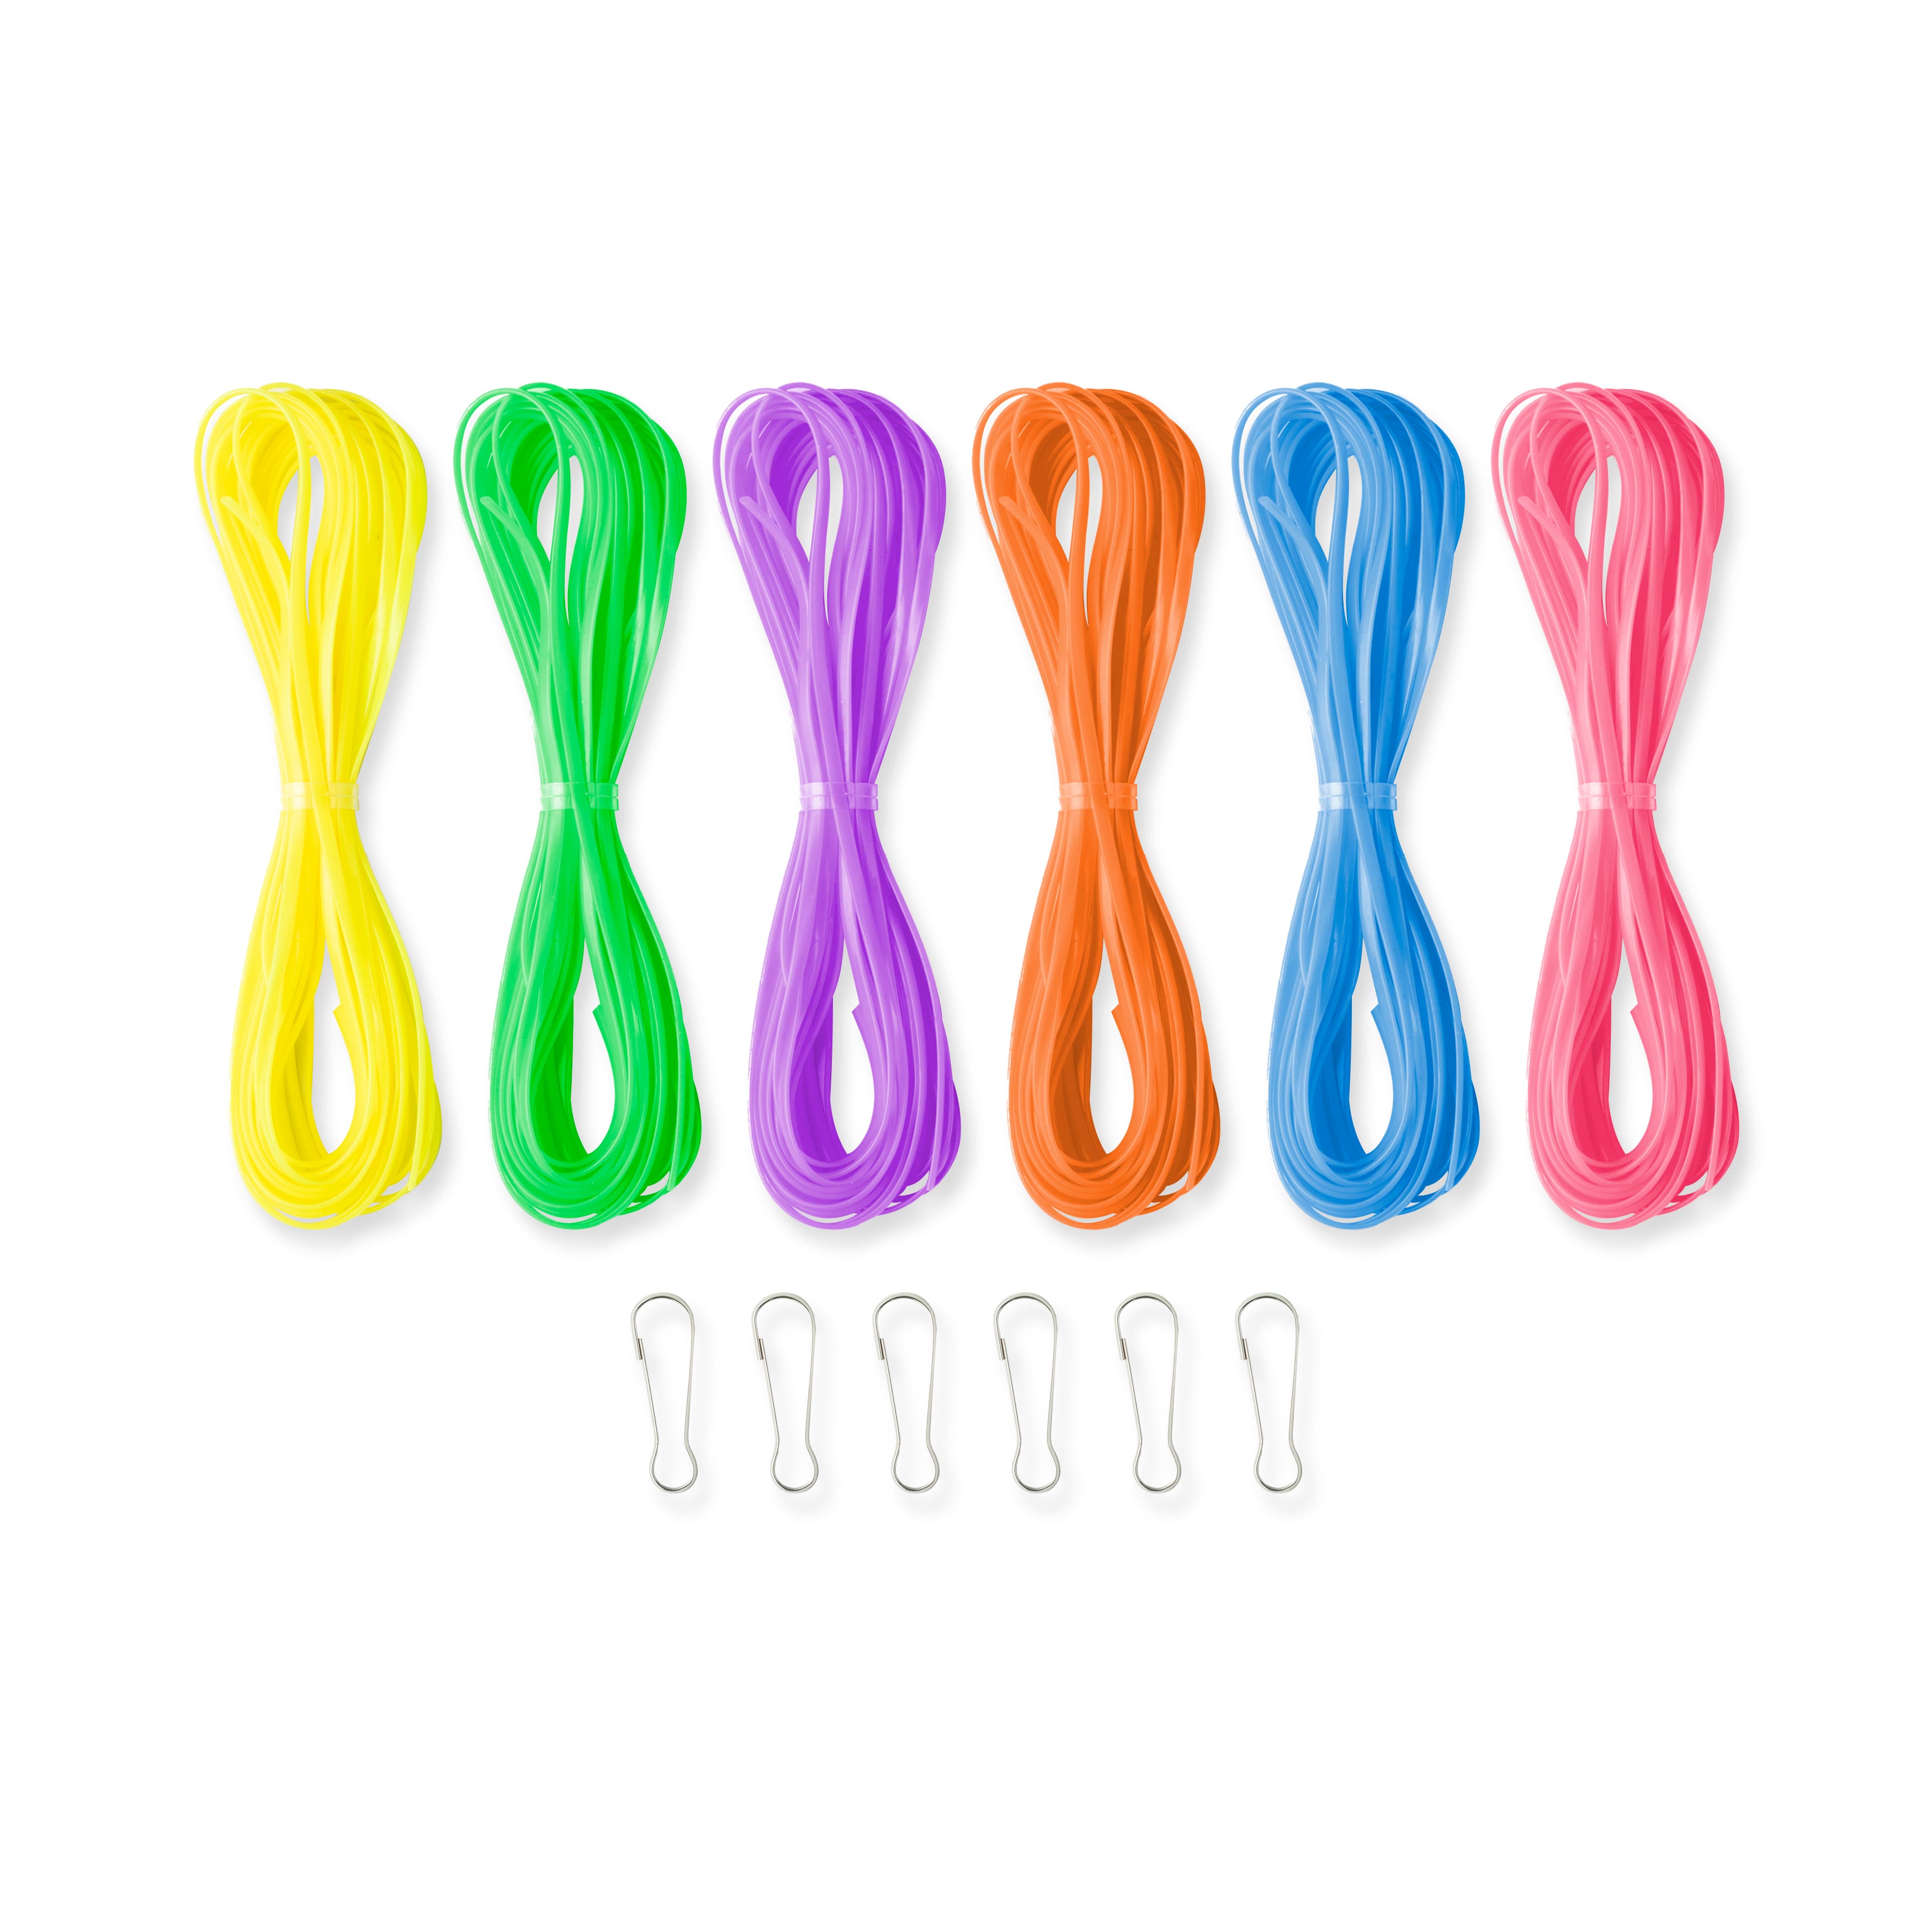 12 Pack: Neon Plastic Lacing Kit by Creatology&#x2122;